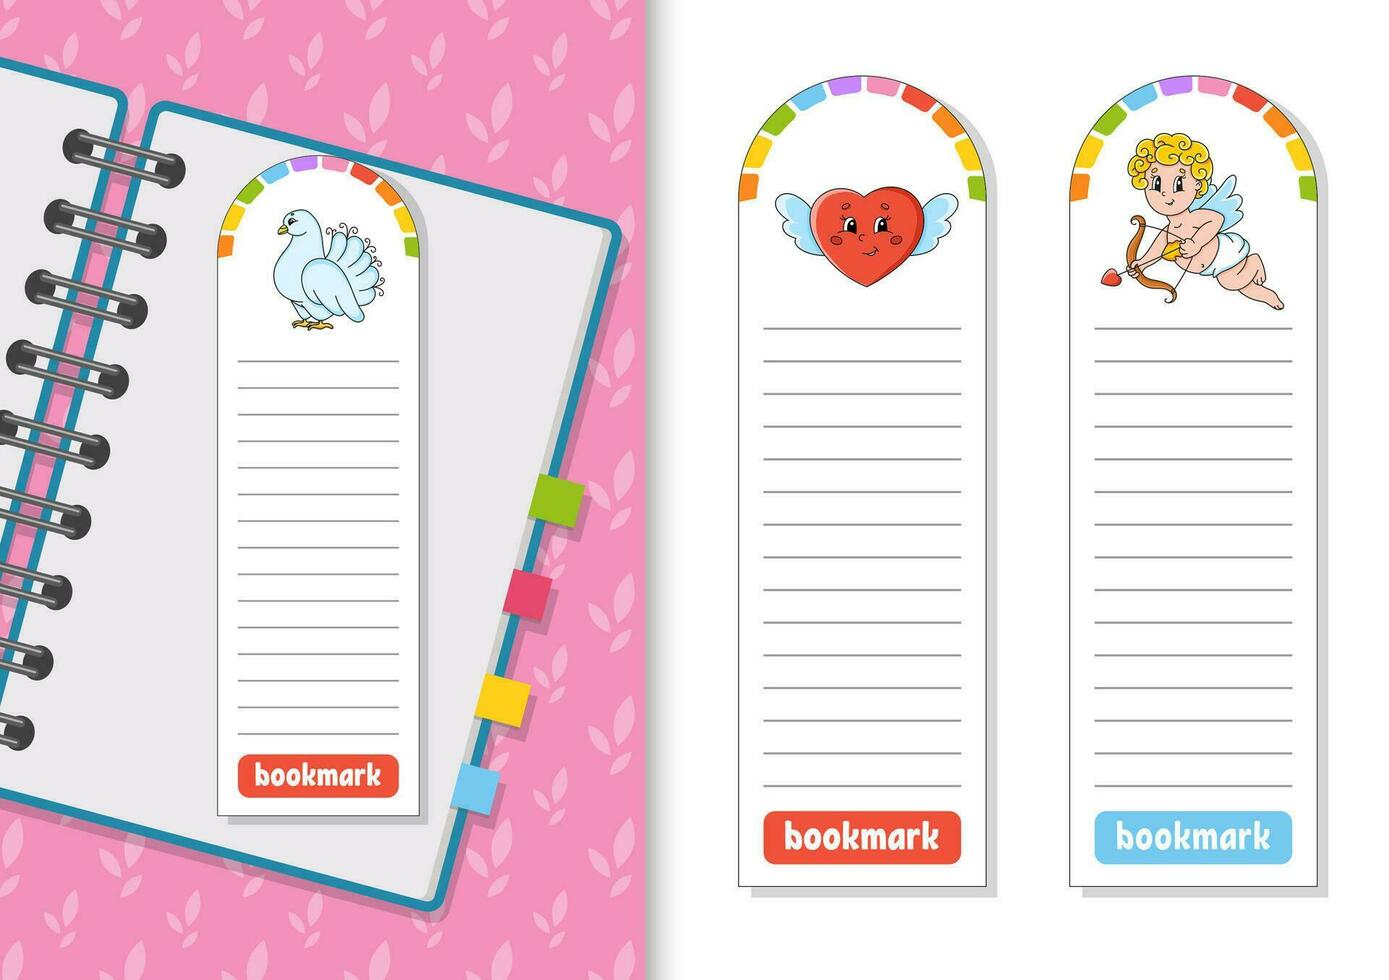 Set of paper bookmarks for books with cute cartoon characters. For kids. Isolated on white background. Vector illustration.